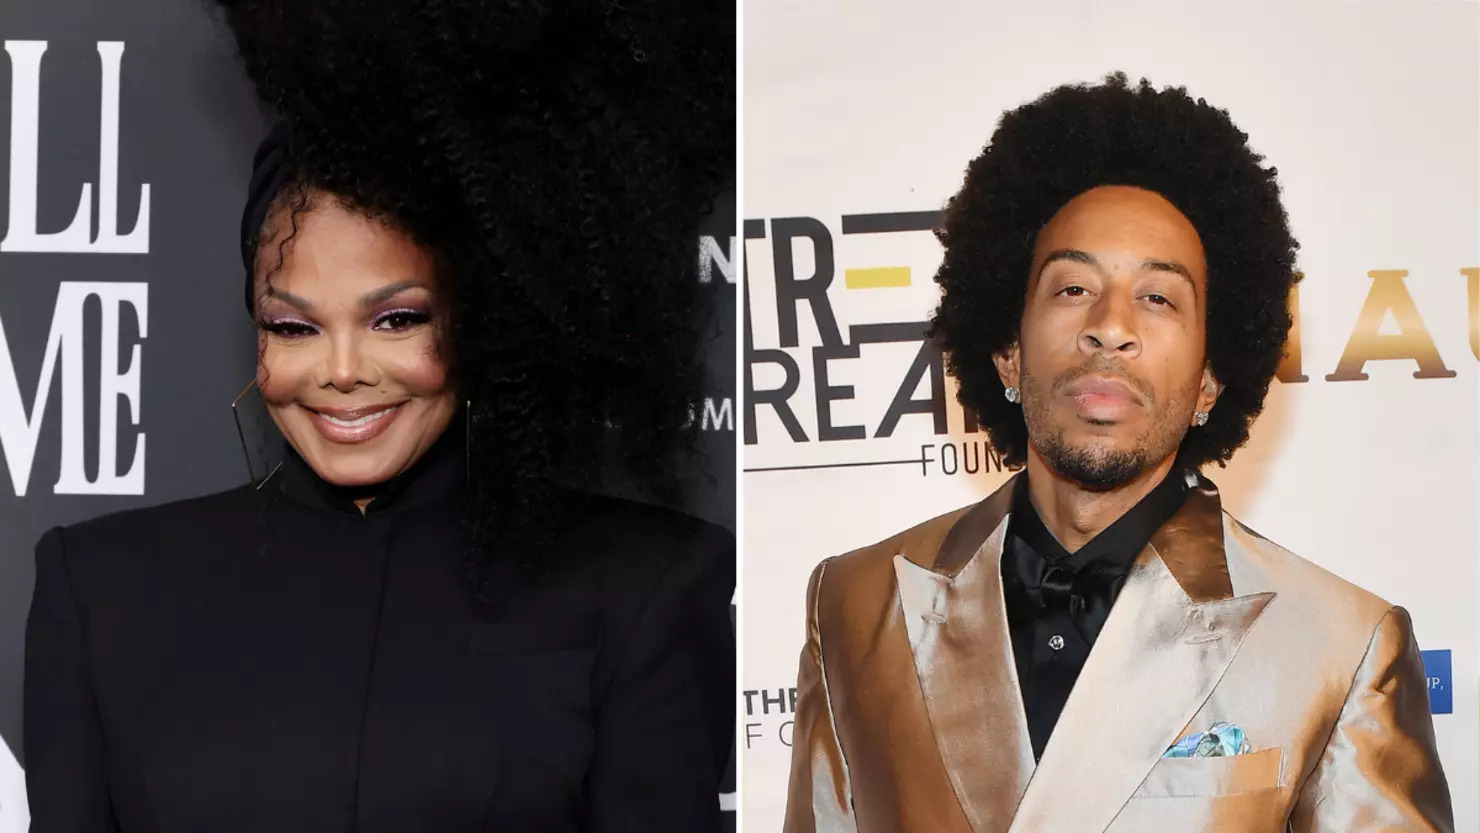 The "Together Again" Tour Is Announced By Janet Jackson With Ludacris As Special Guest